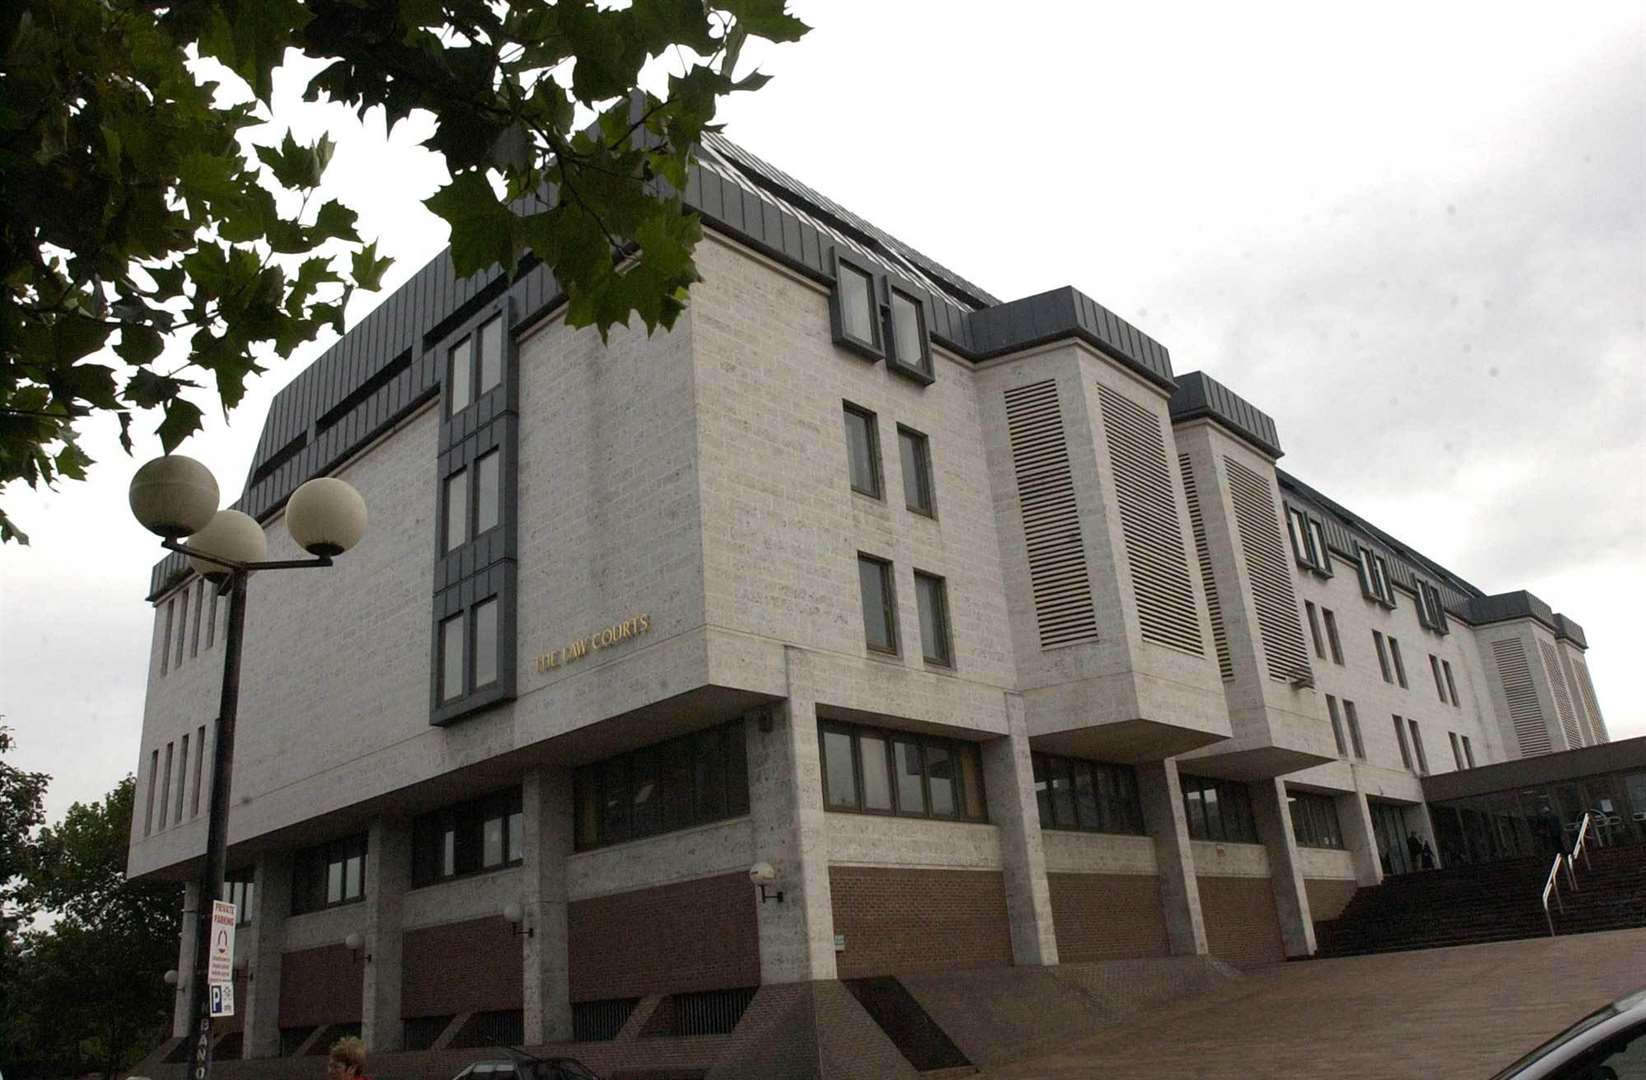 A judge at Maidstone Crown Court said Mr Lifton "never stood a chance"